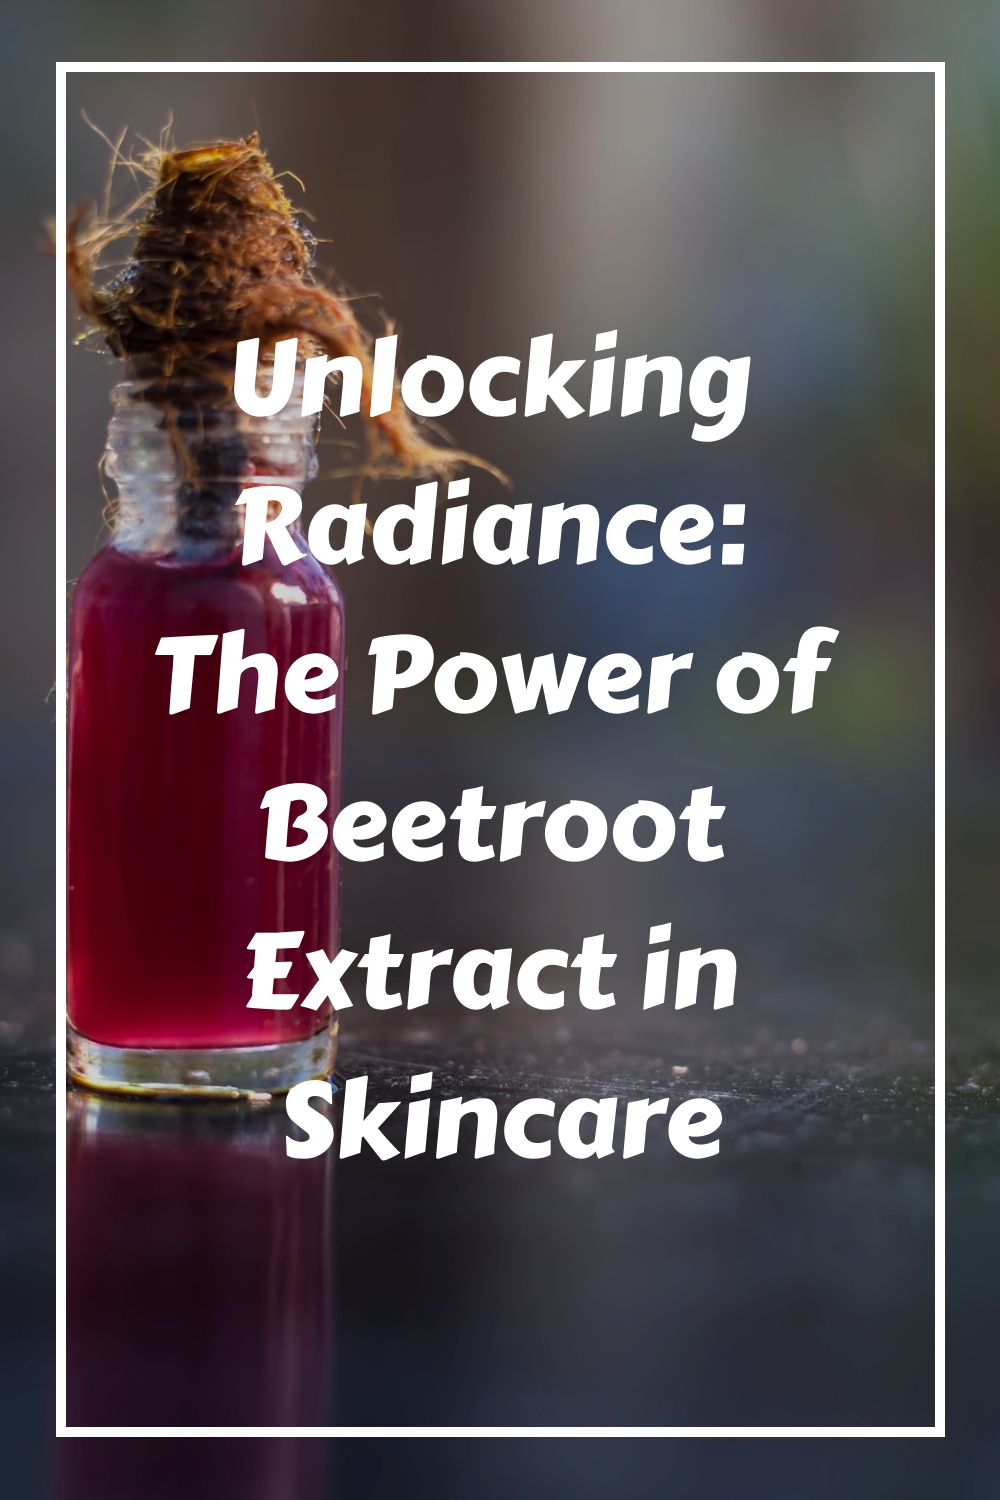 Unlocking Radiance: The Power of Beetroot Extract in Skincare